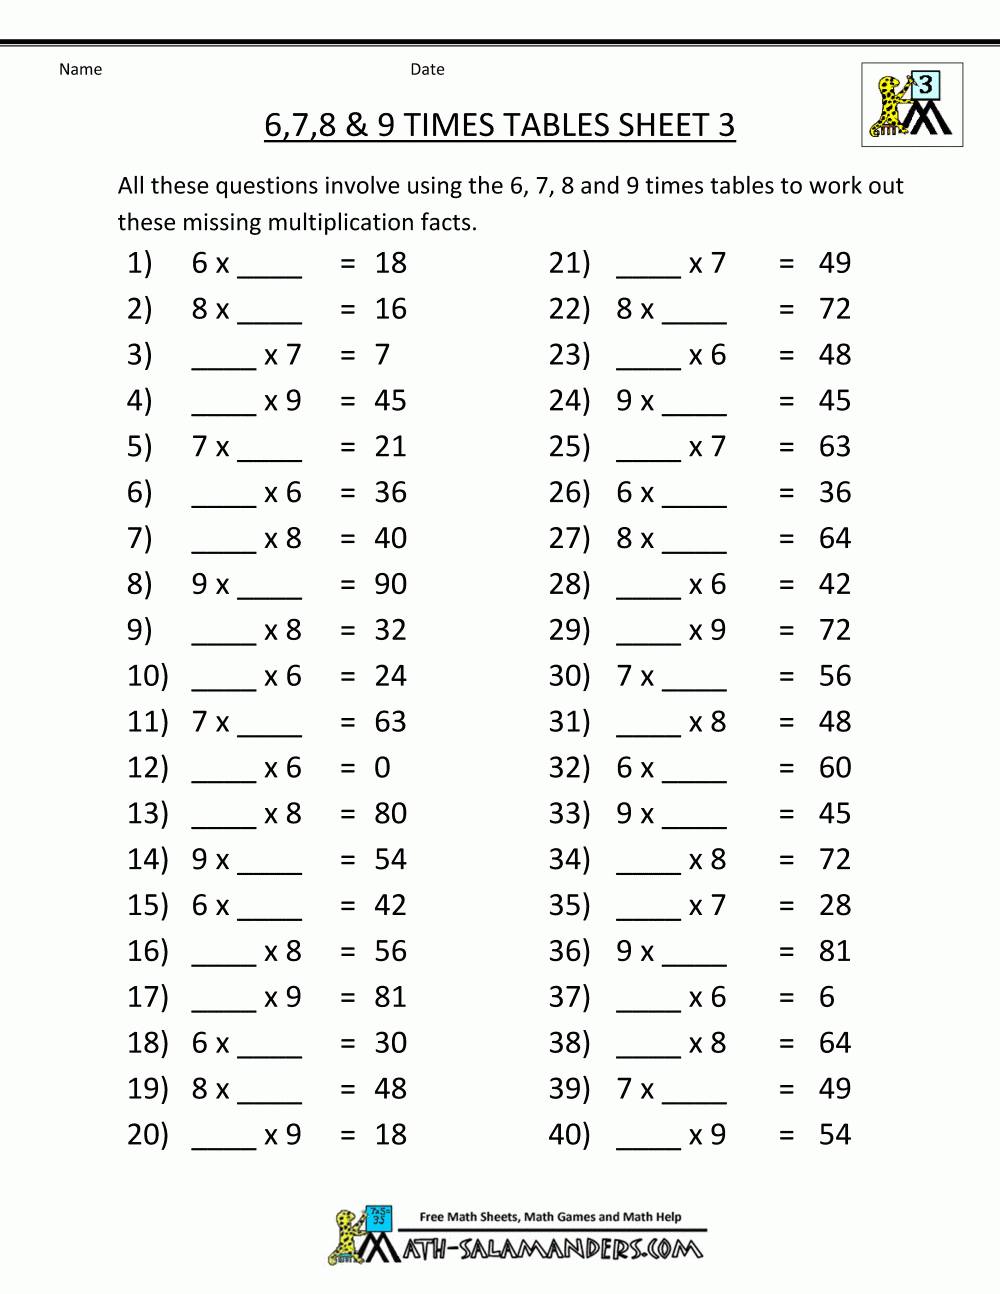 Free Multiplication Worksheets 6 7 8 9 Times Tables 3 | 4Th inside Worksheets Multiplication 6